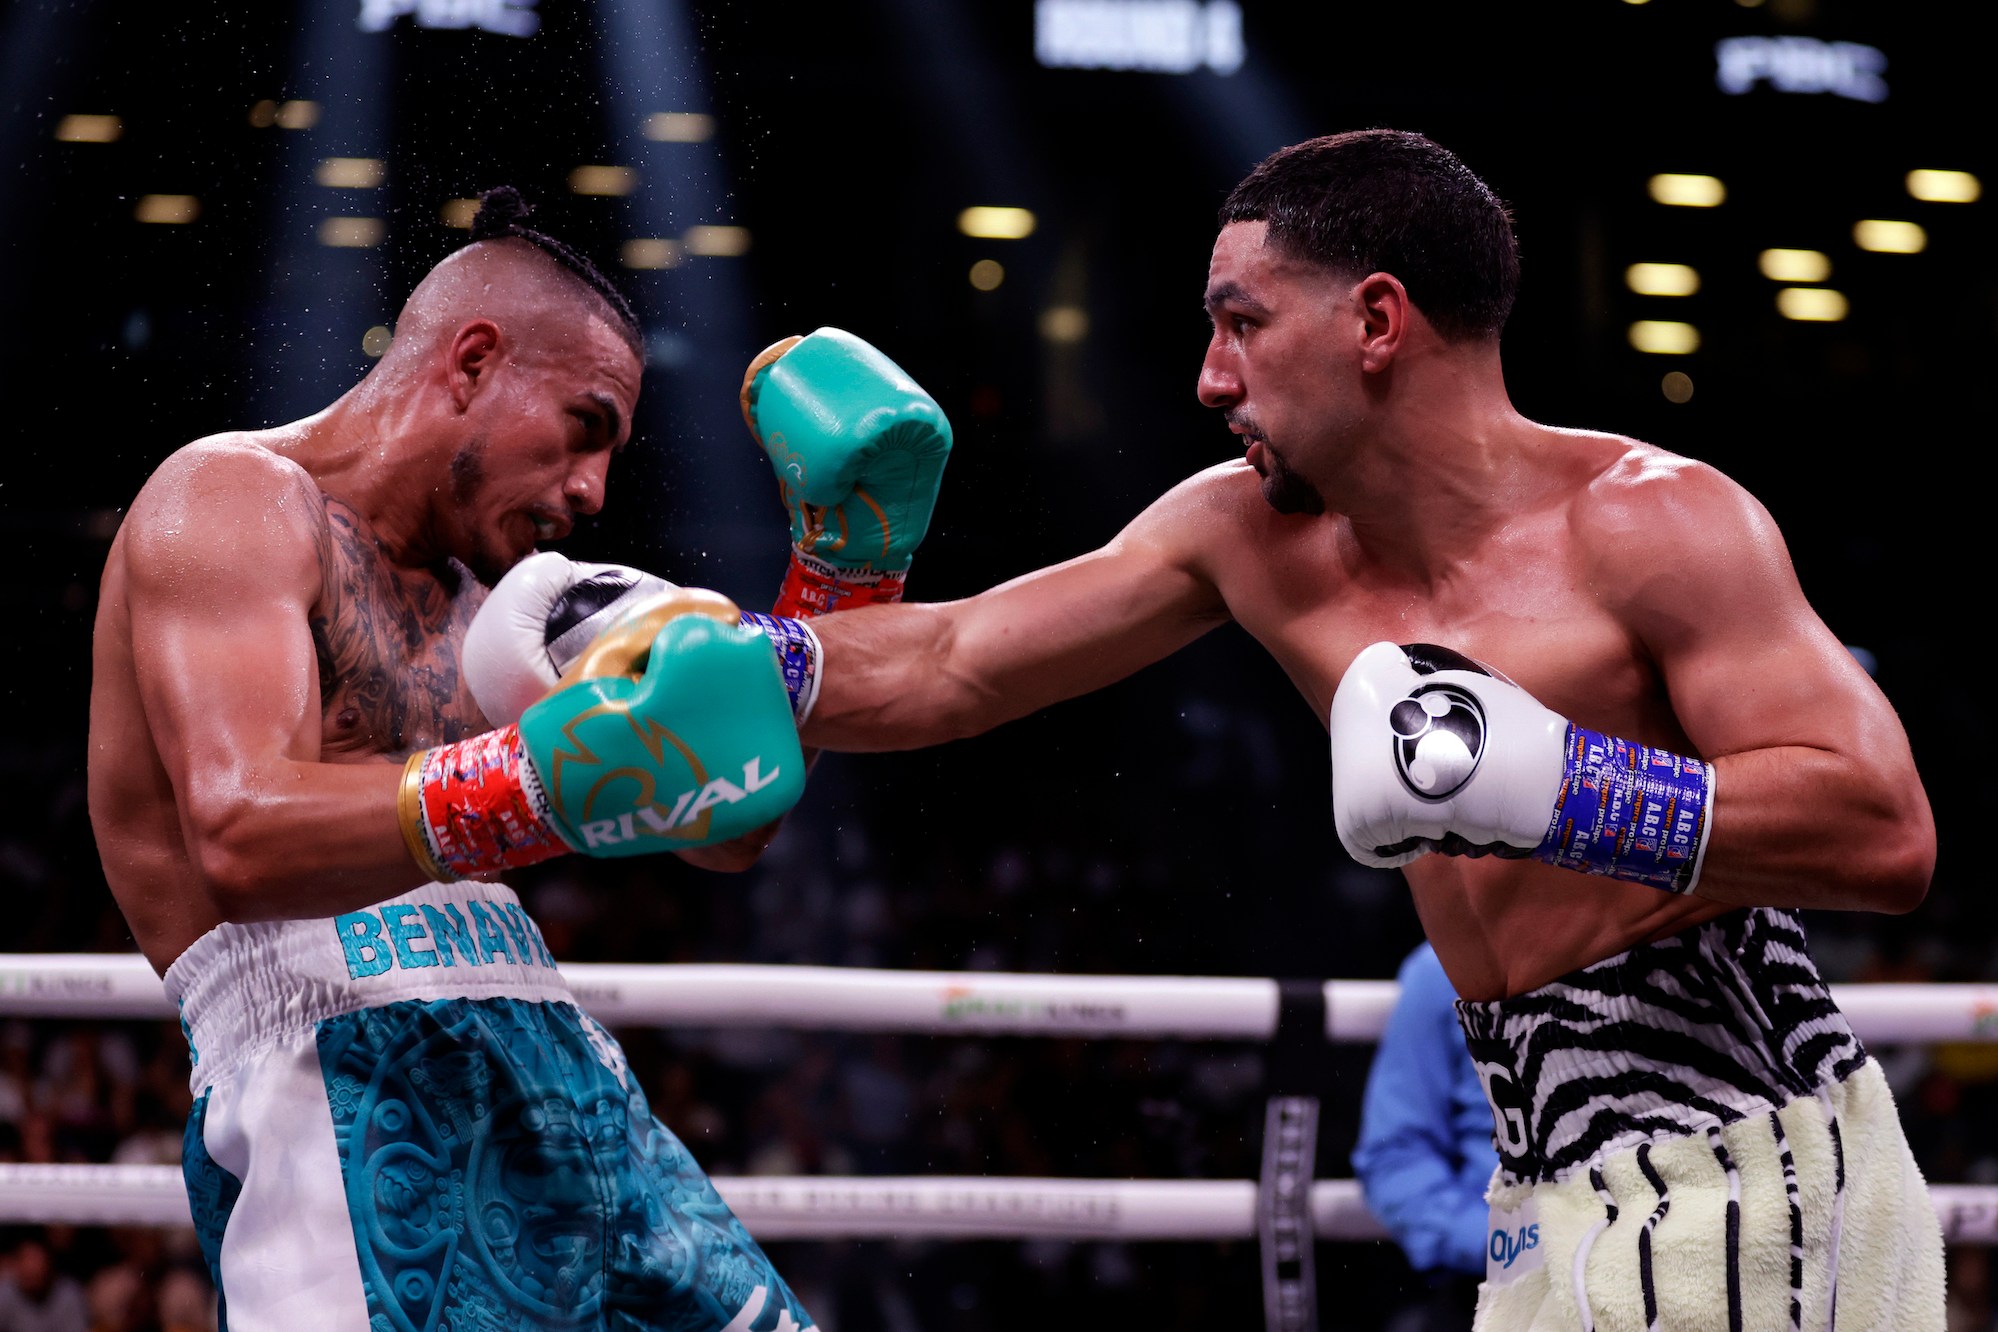 NEW YORK, NEW YORK - JULY 30: Danny Garcia lands a punch on Jose Benavidez Jr. (teal shorts) during their super welterweight boxing match at Barclays Center on July 30, 2022 in in the Brooklyn borough of New York. (Photo by Adam Hunger/Getty Images)